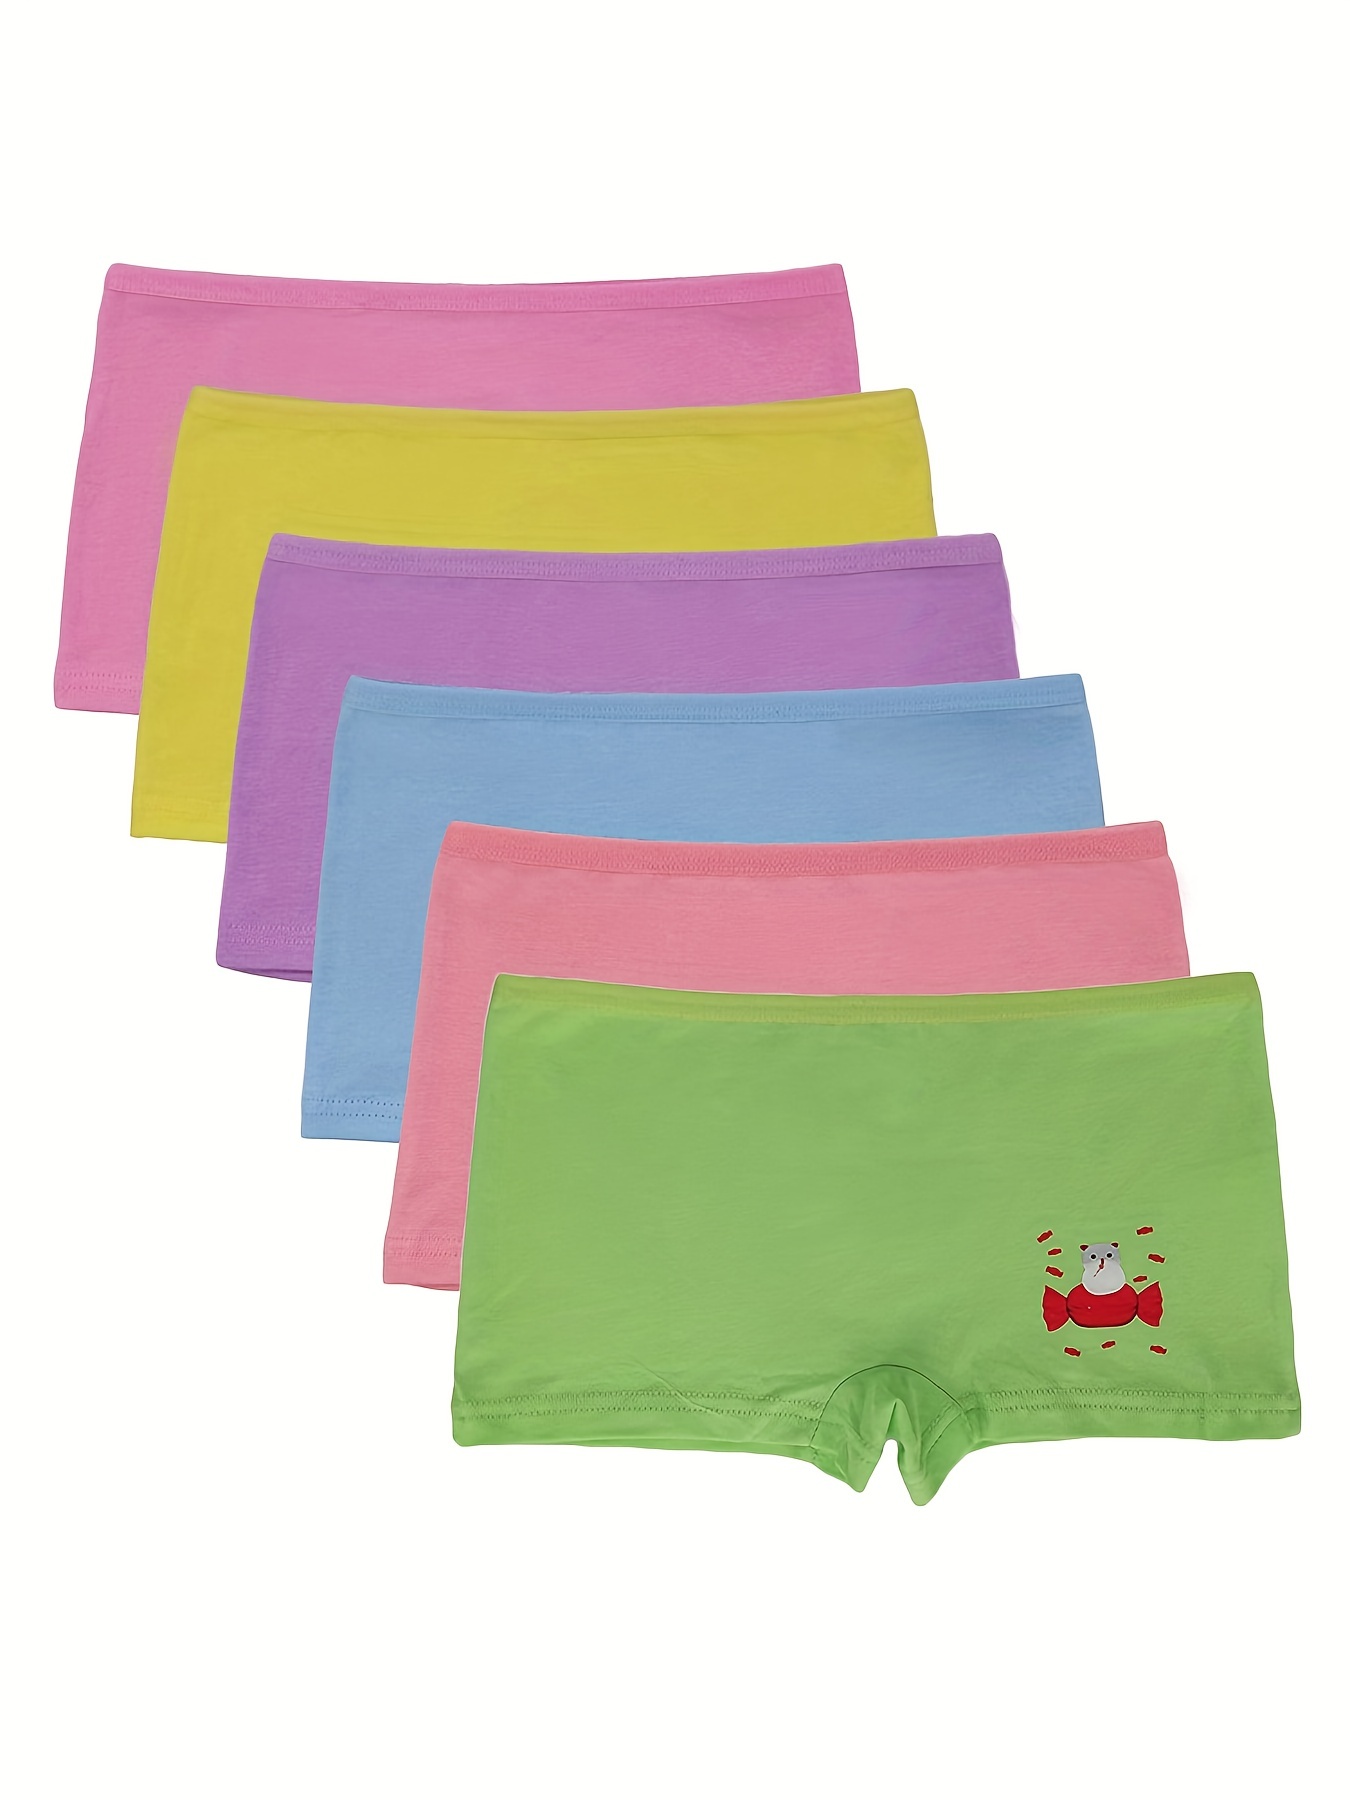 5 Pcs/lot Girls Panties Cotton Kids Beautiful Underwear Cartoon Children Briefs  Girls Breathable Triangle Underpants For Girls Color: 5-20GS003, Kid Size:  M (For 2-4 Years)